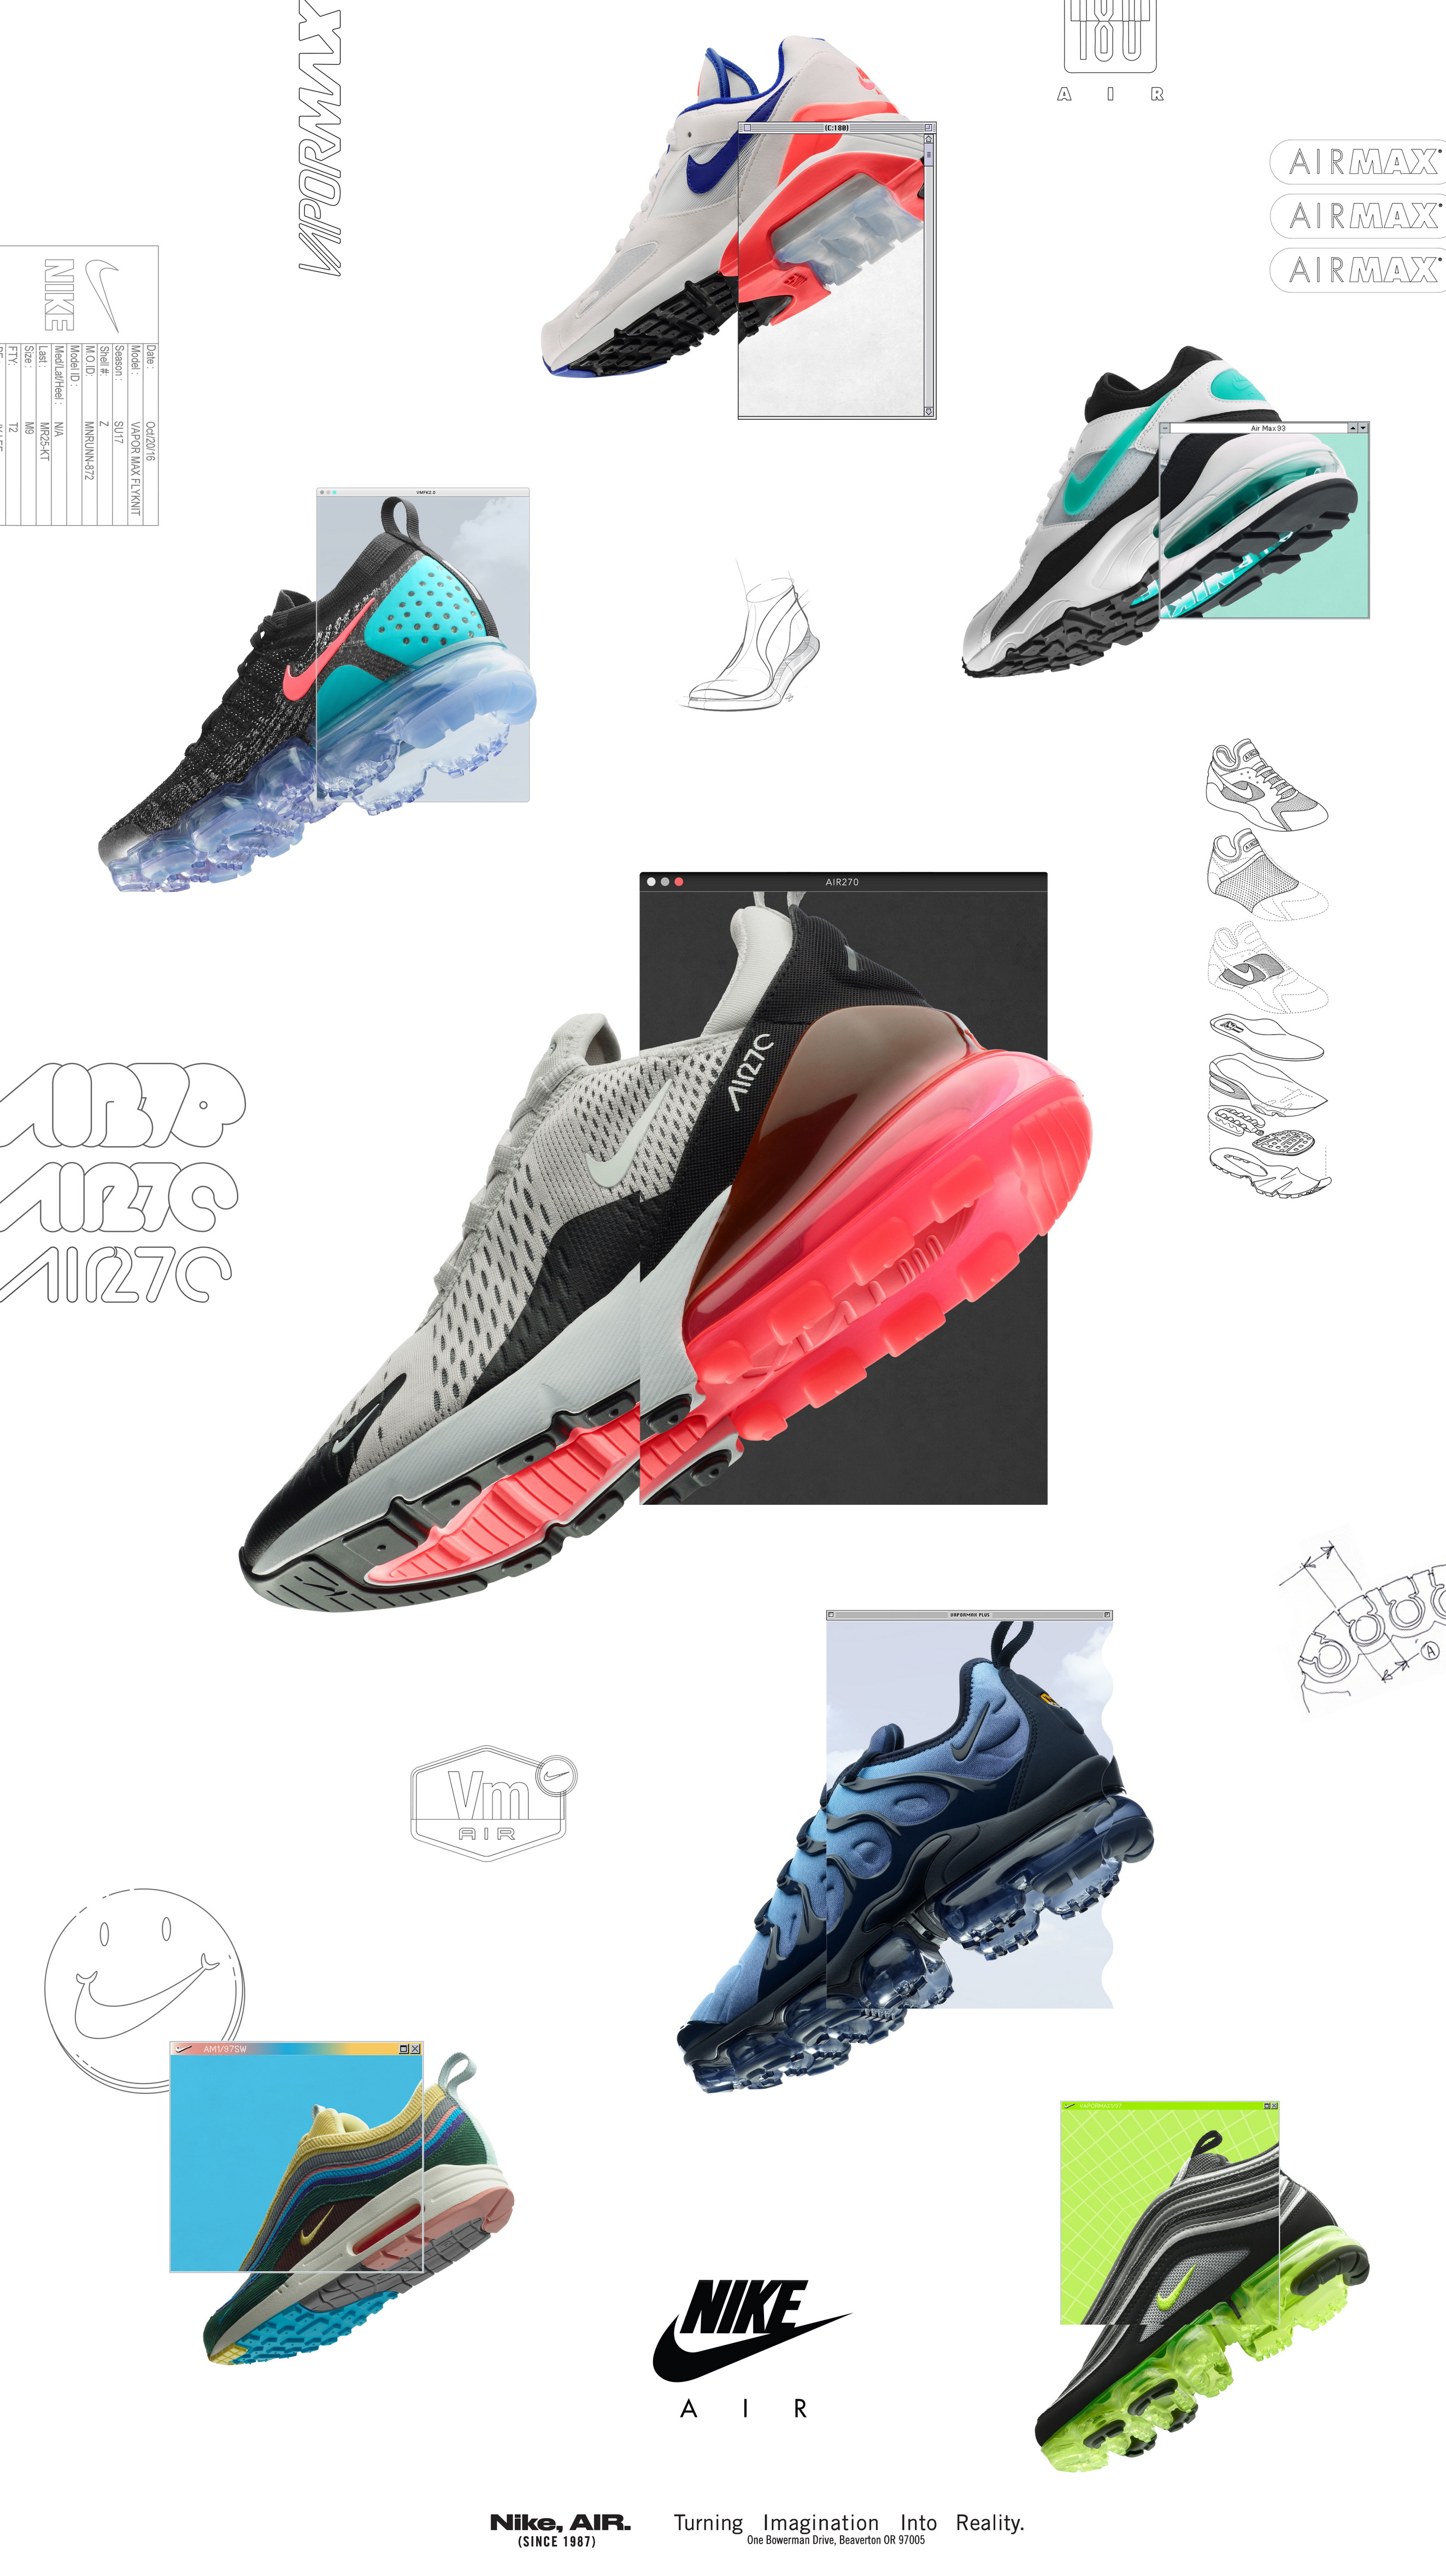 Air Max Day 2018 Date Online Sale, UP 